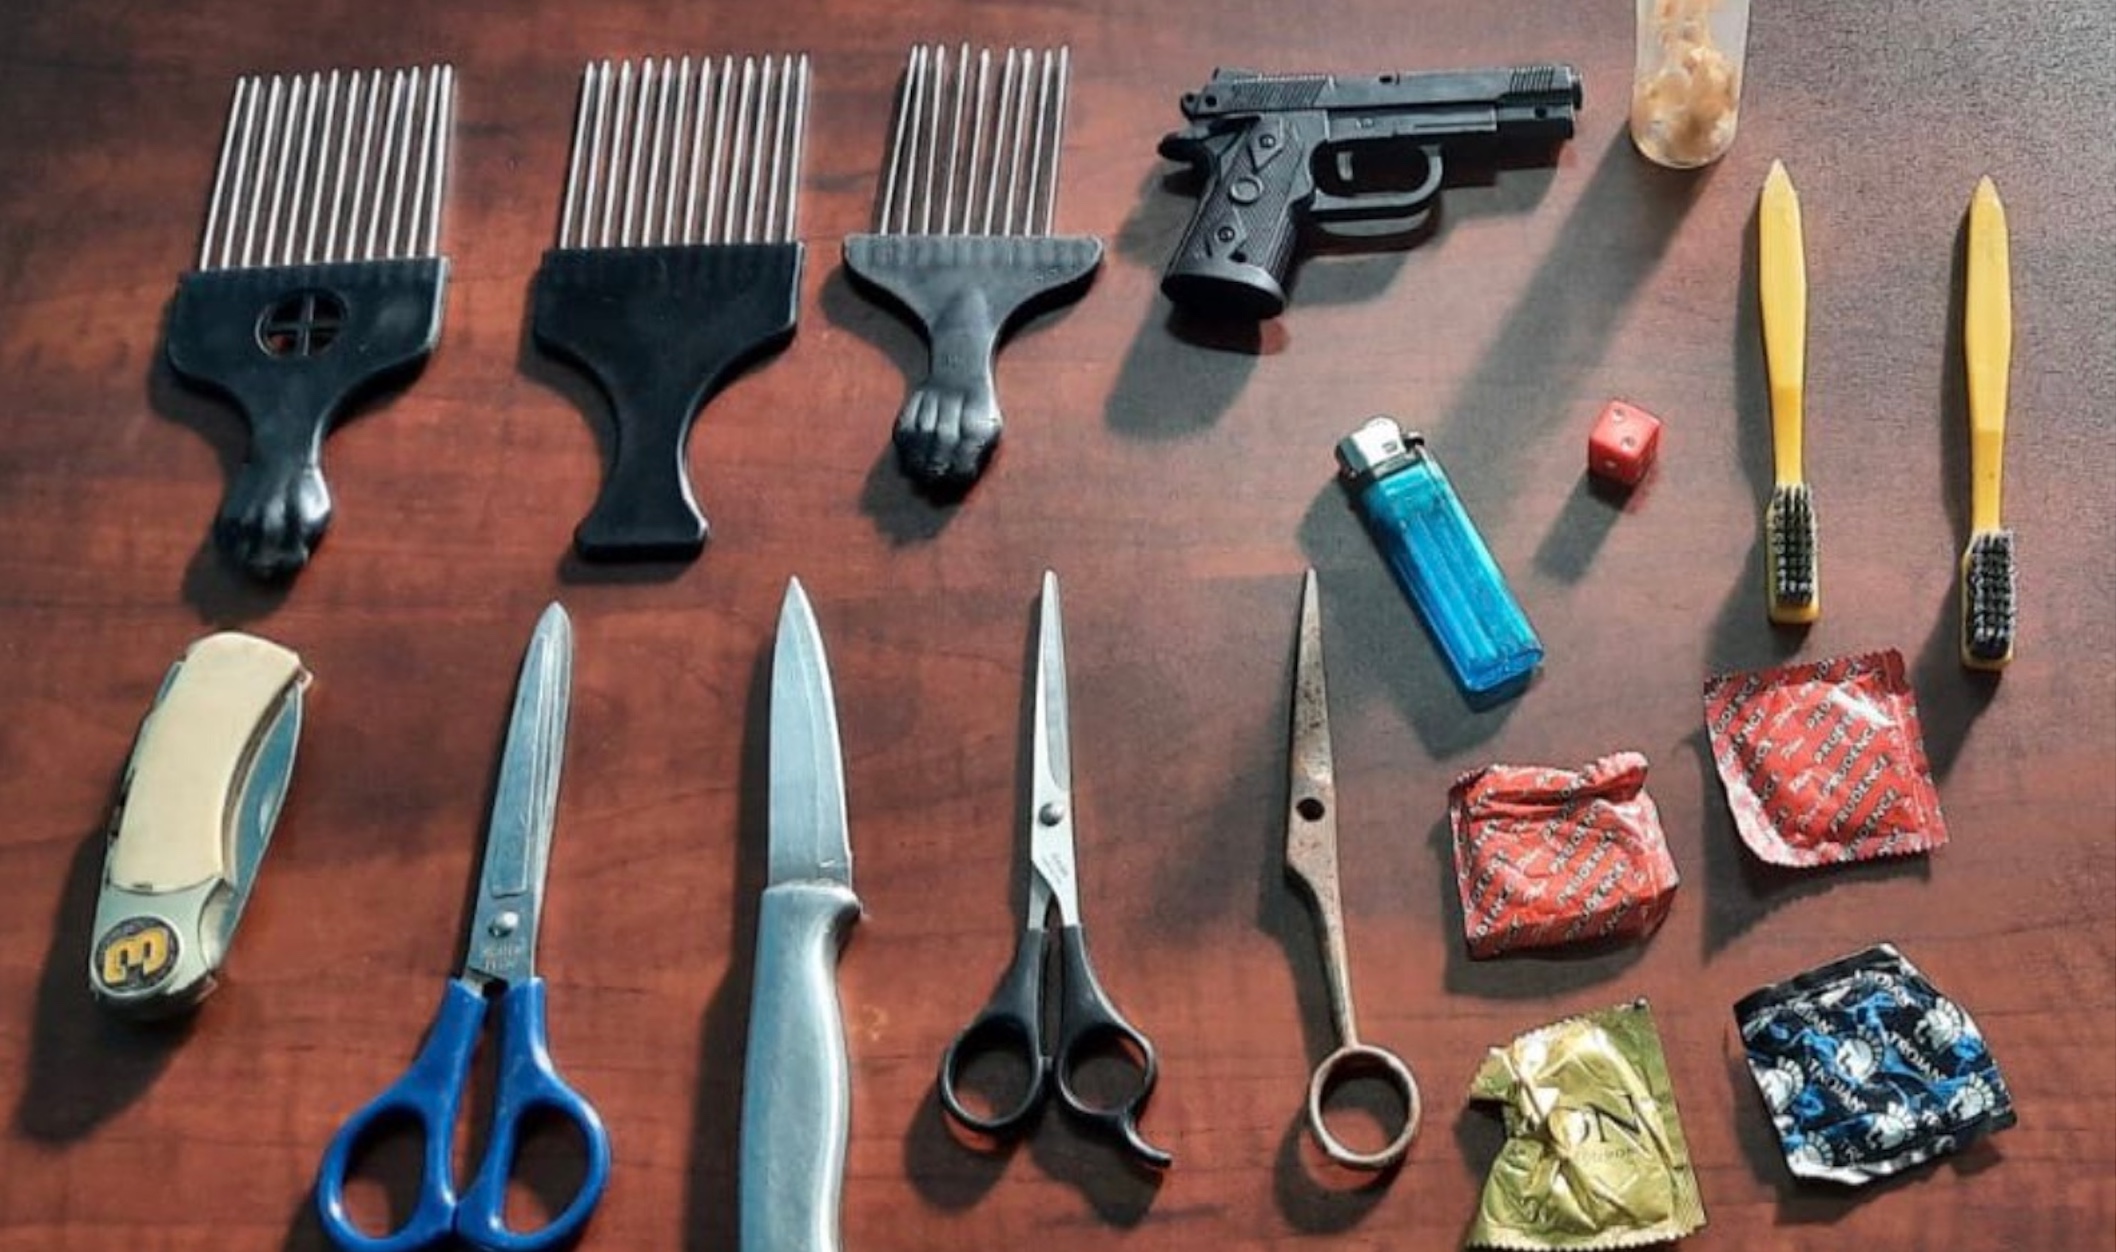 Deadly Weapons And Prohibited Items Found At A High School – YARDHYPE